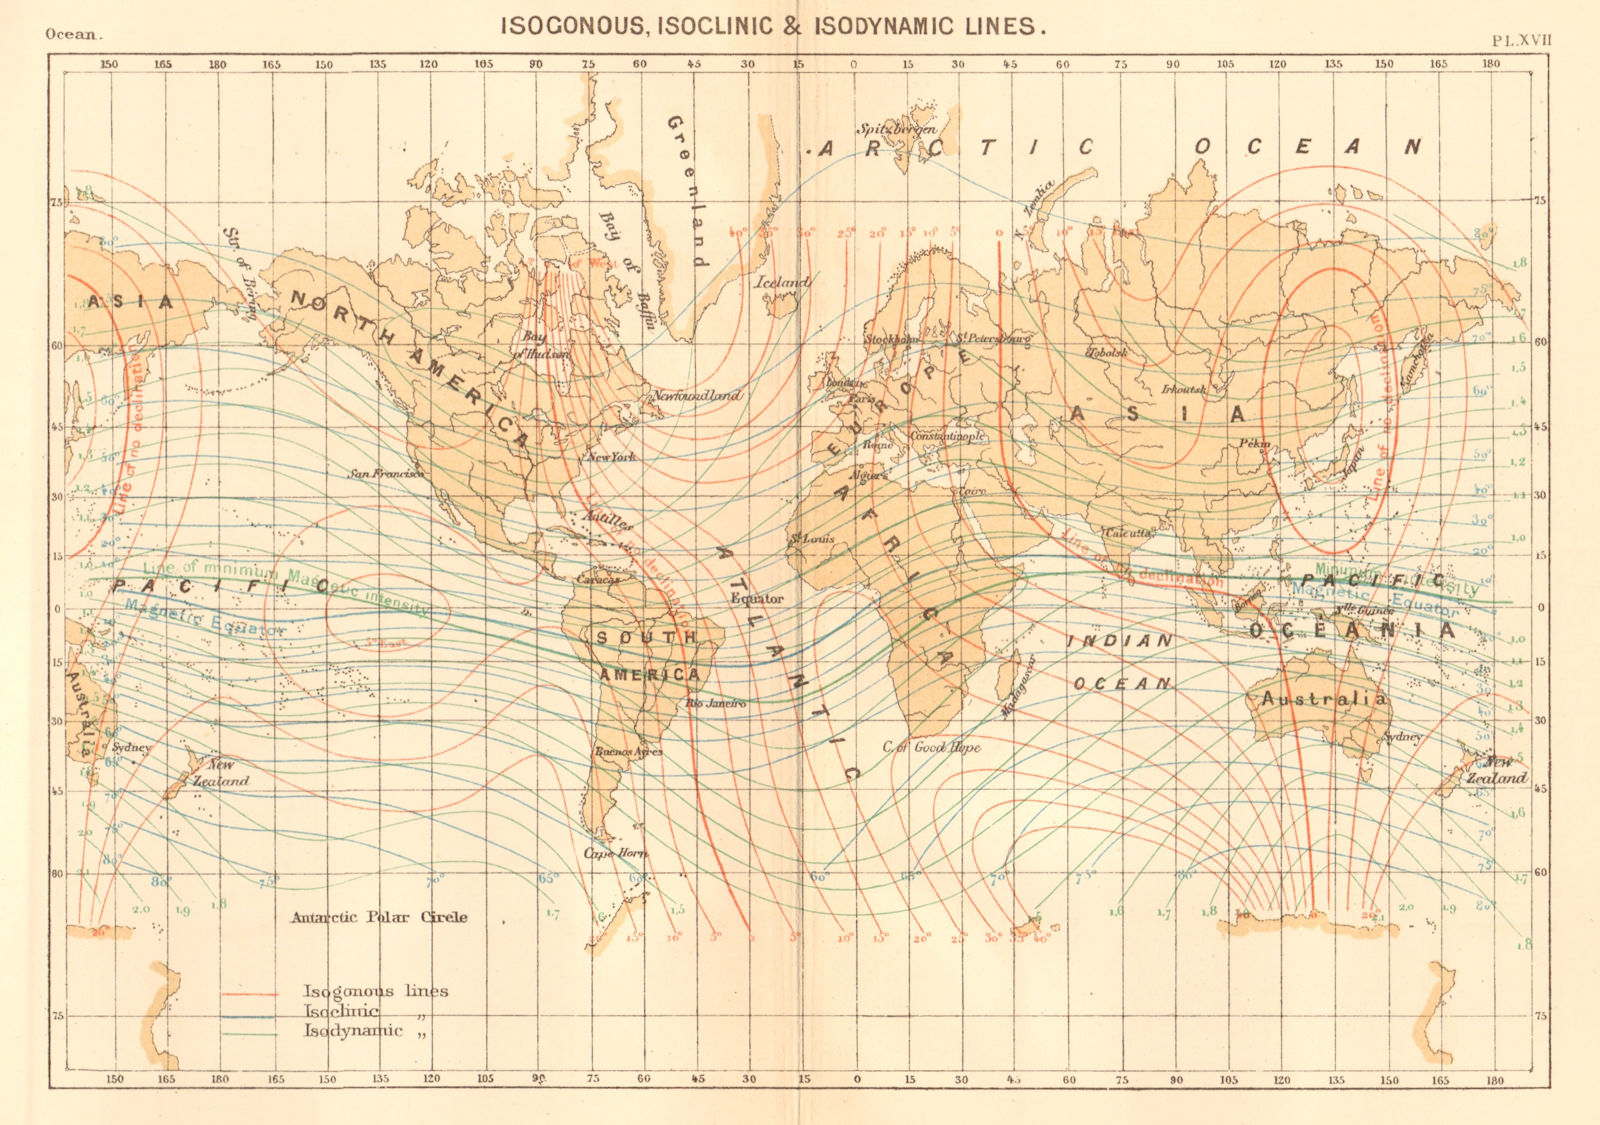 Associate Product Isogonous, Isoclinic & Isodynamic Lines. World 1886 old antique map plan chart